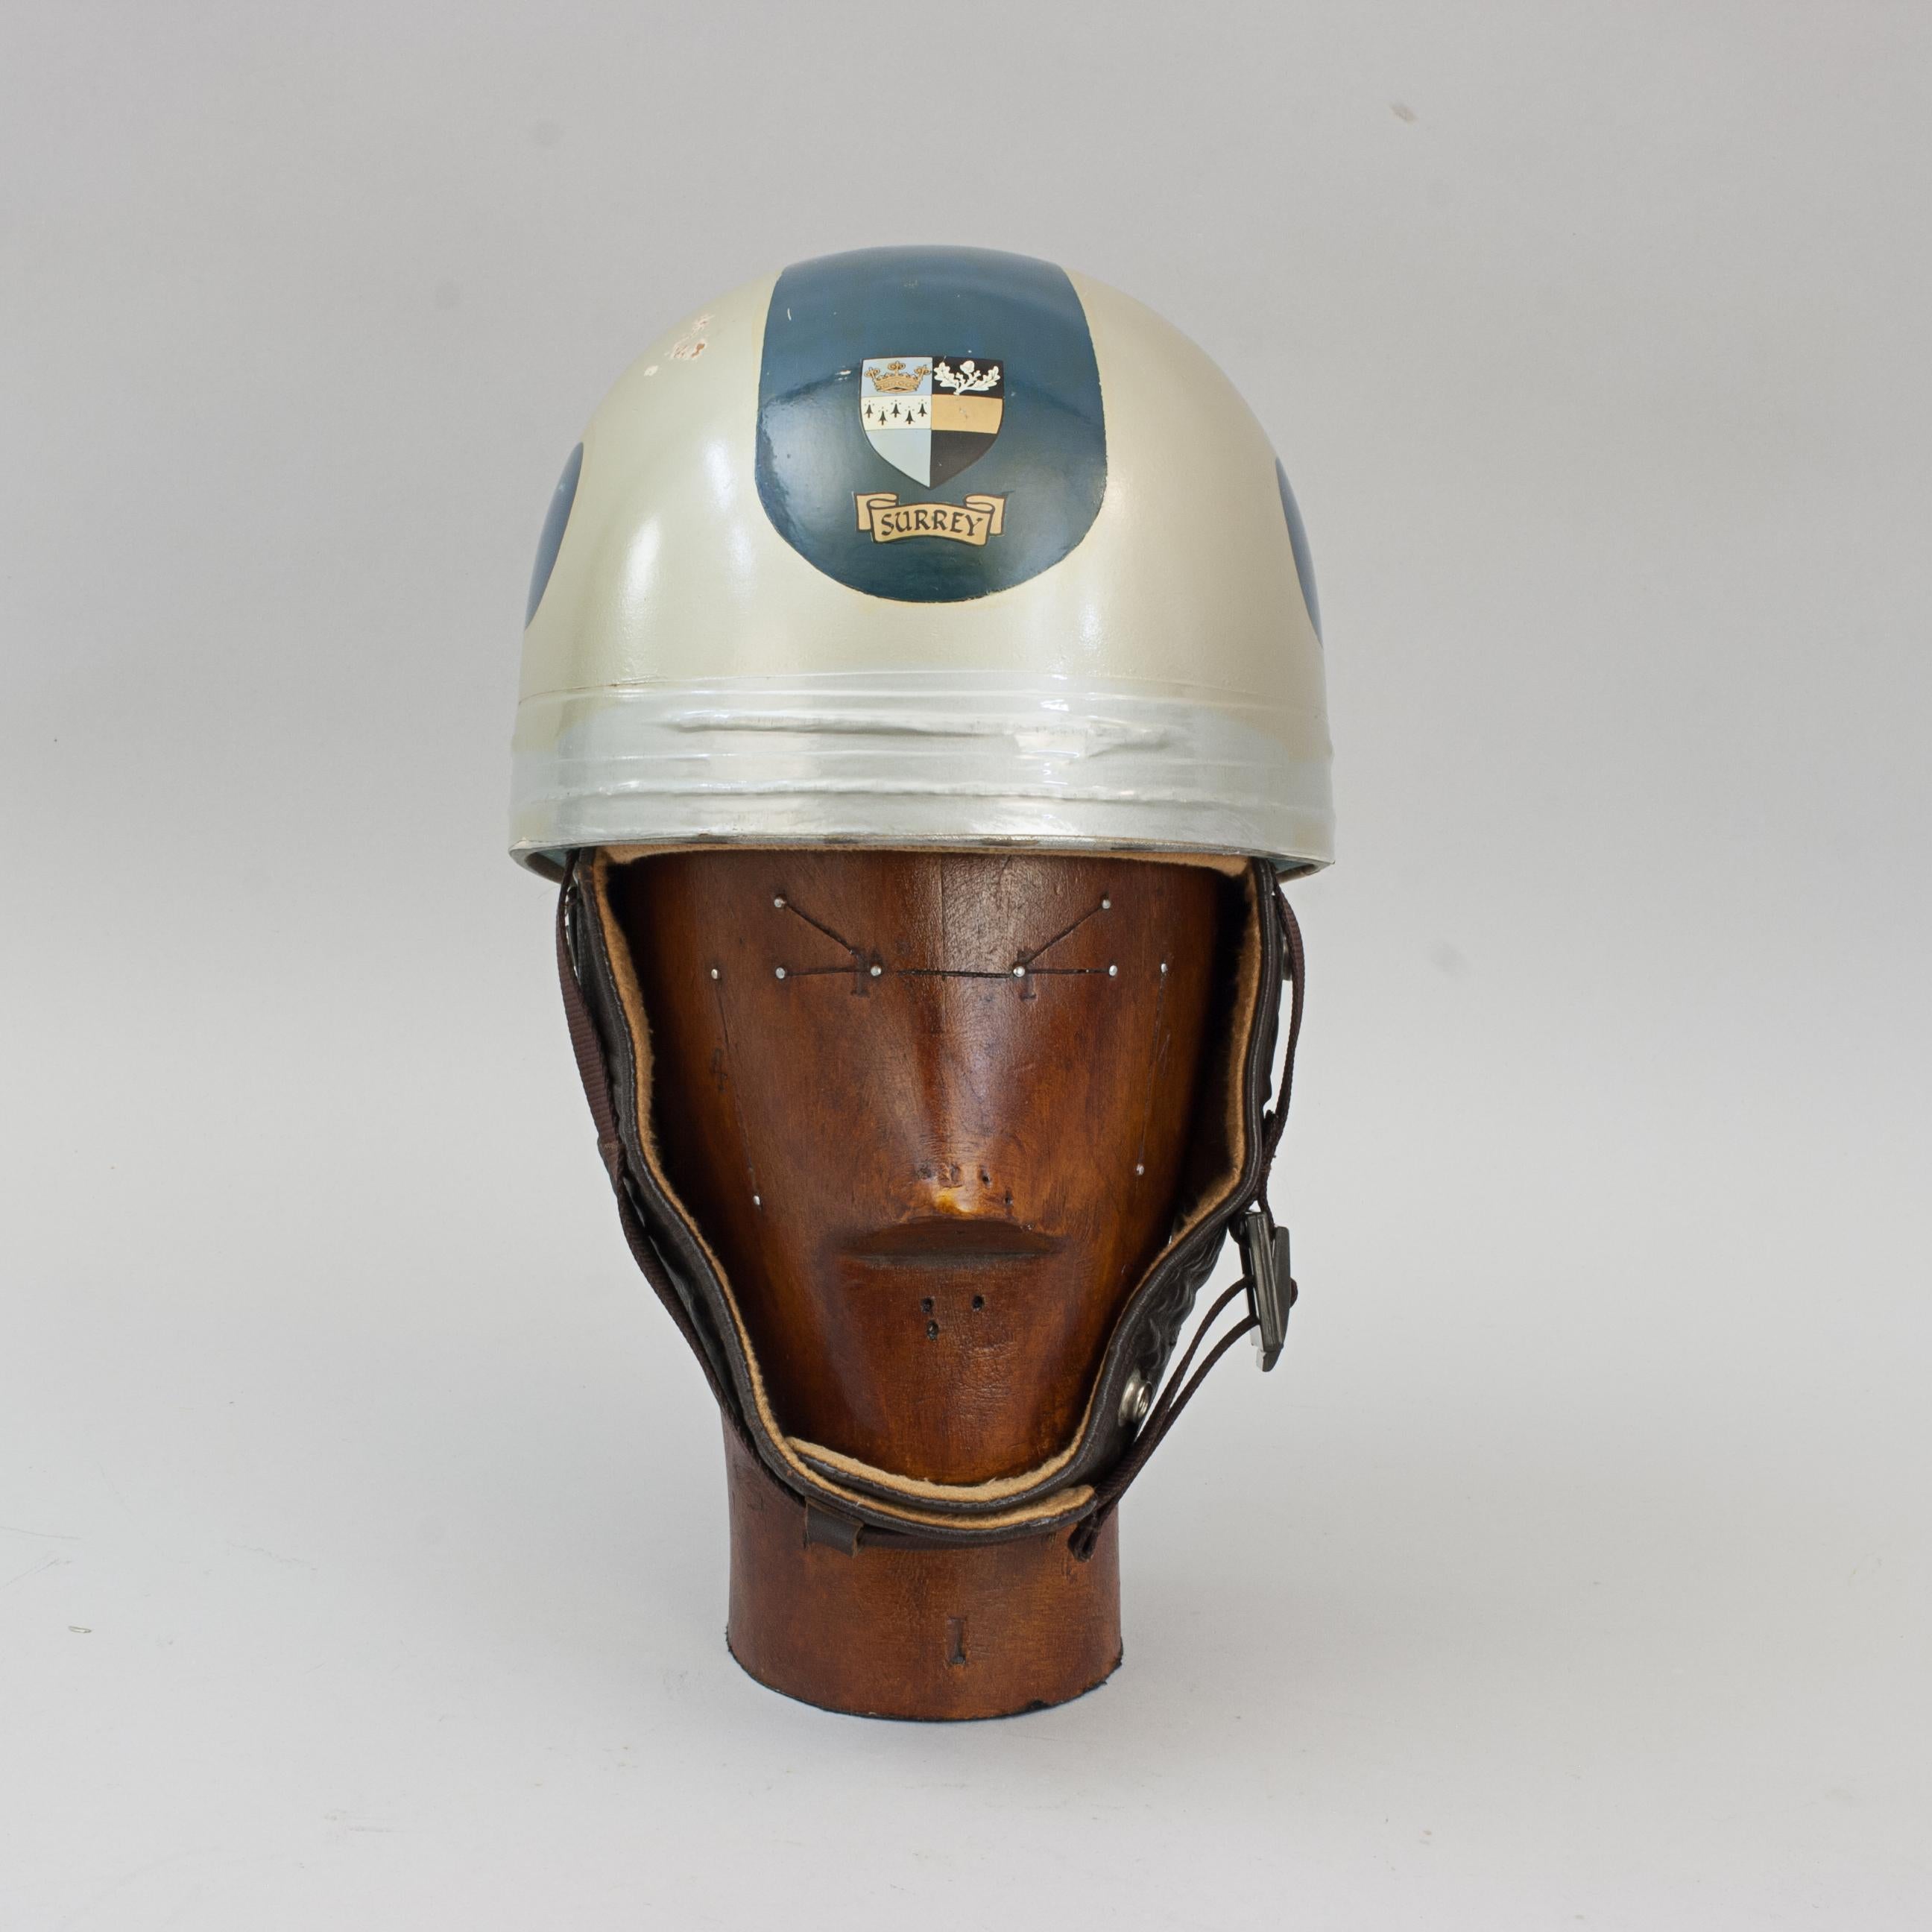 Vintage Cromwell Motorcycle Crash Helmet.
A fine motorcycle, pudding basin shaped helmet made in England by Cromwell. The helmet with silver and blue paint with the words 'Surrey' and the old coat of arms for the county of Surrey. It has a cork